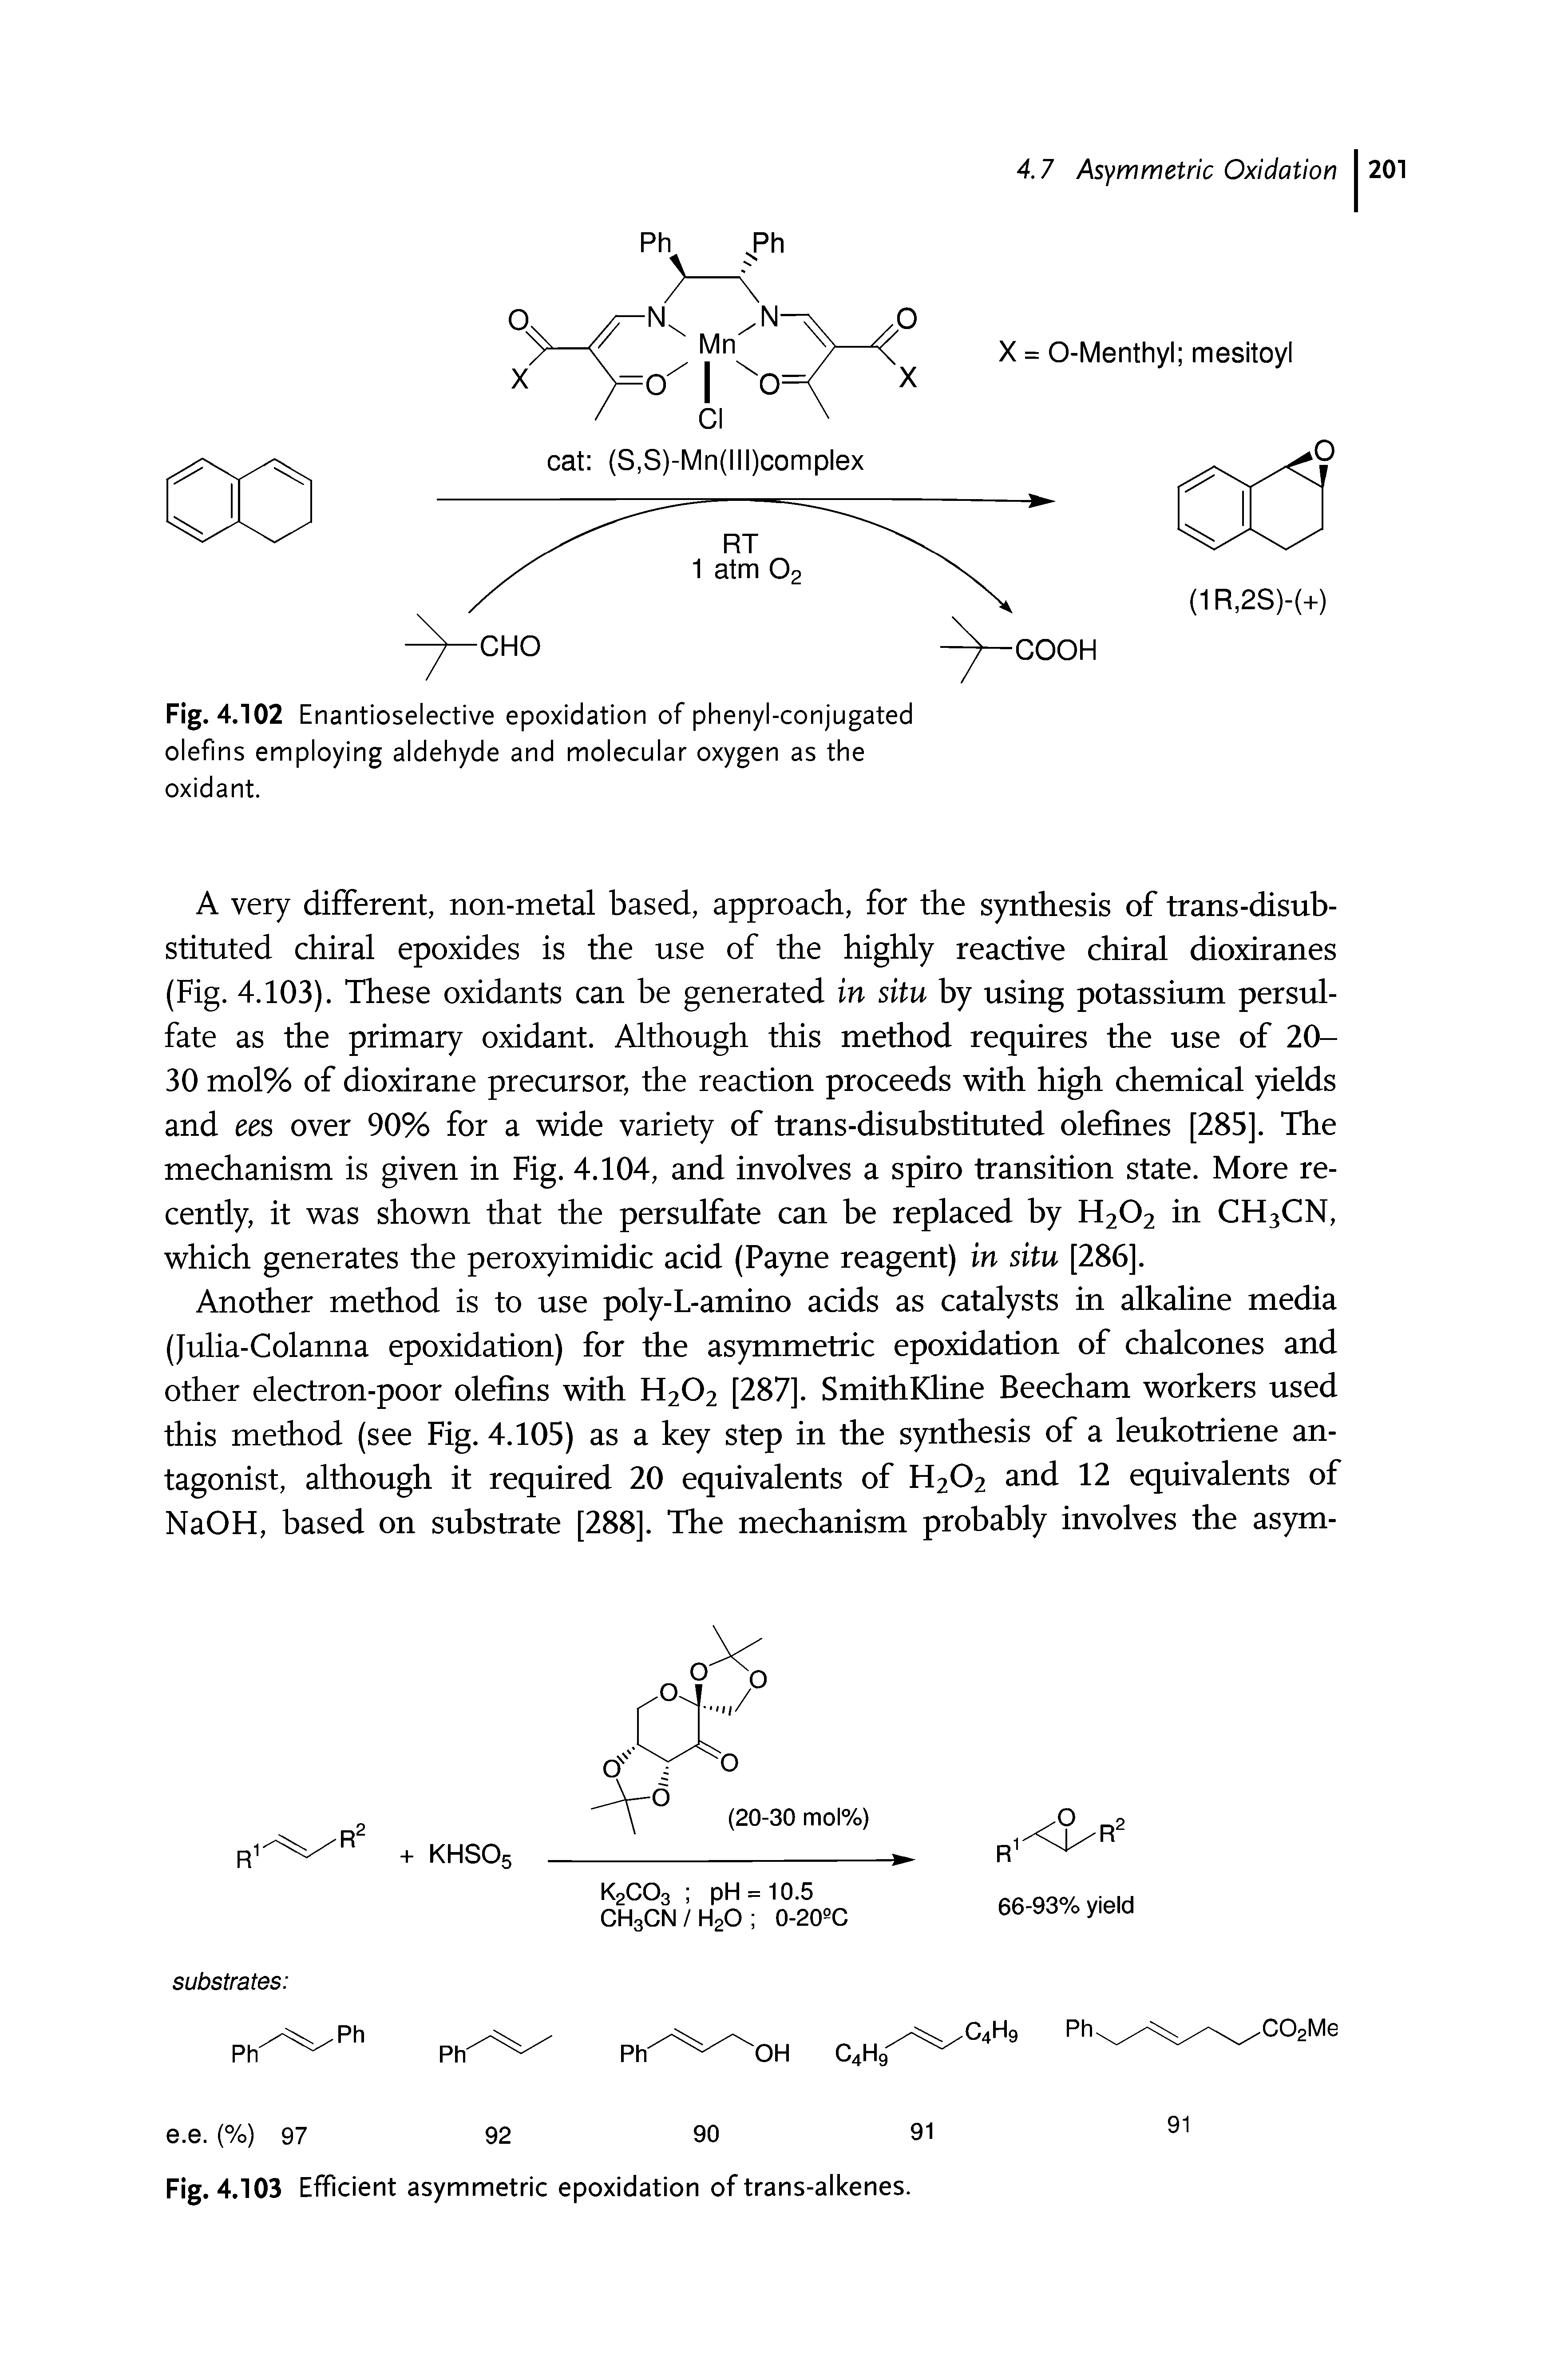 Fig. 4.102 Enantioselective epoxidation of phenyl-conjugated olefins employing aldehyde and molecular oxygen as the oxidant.